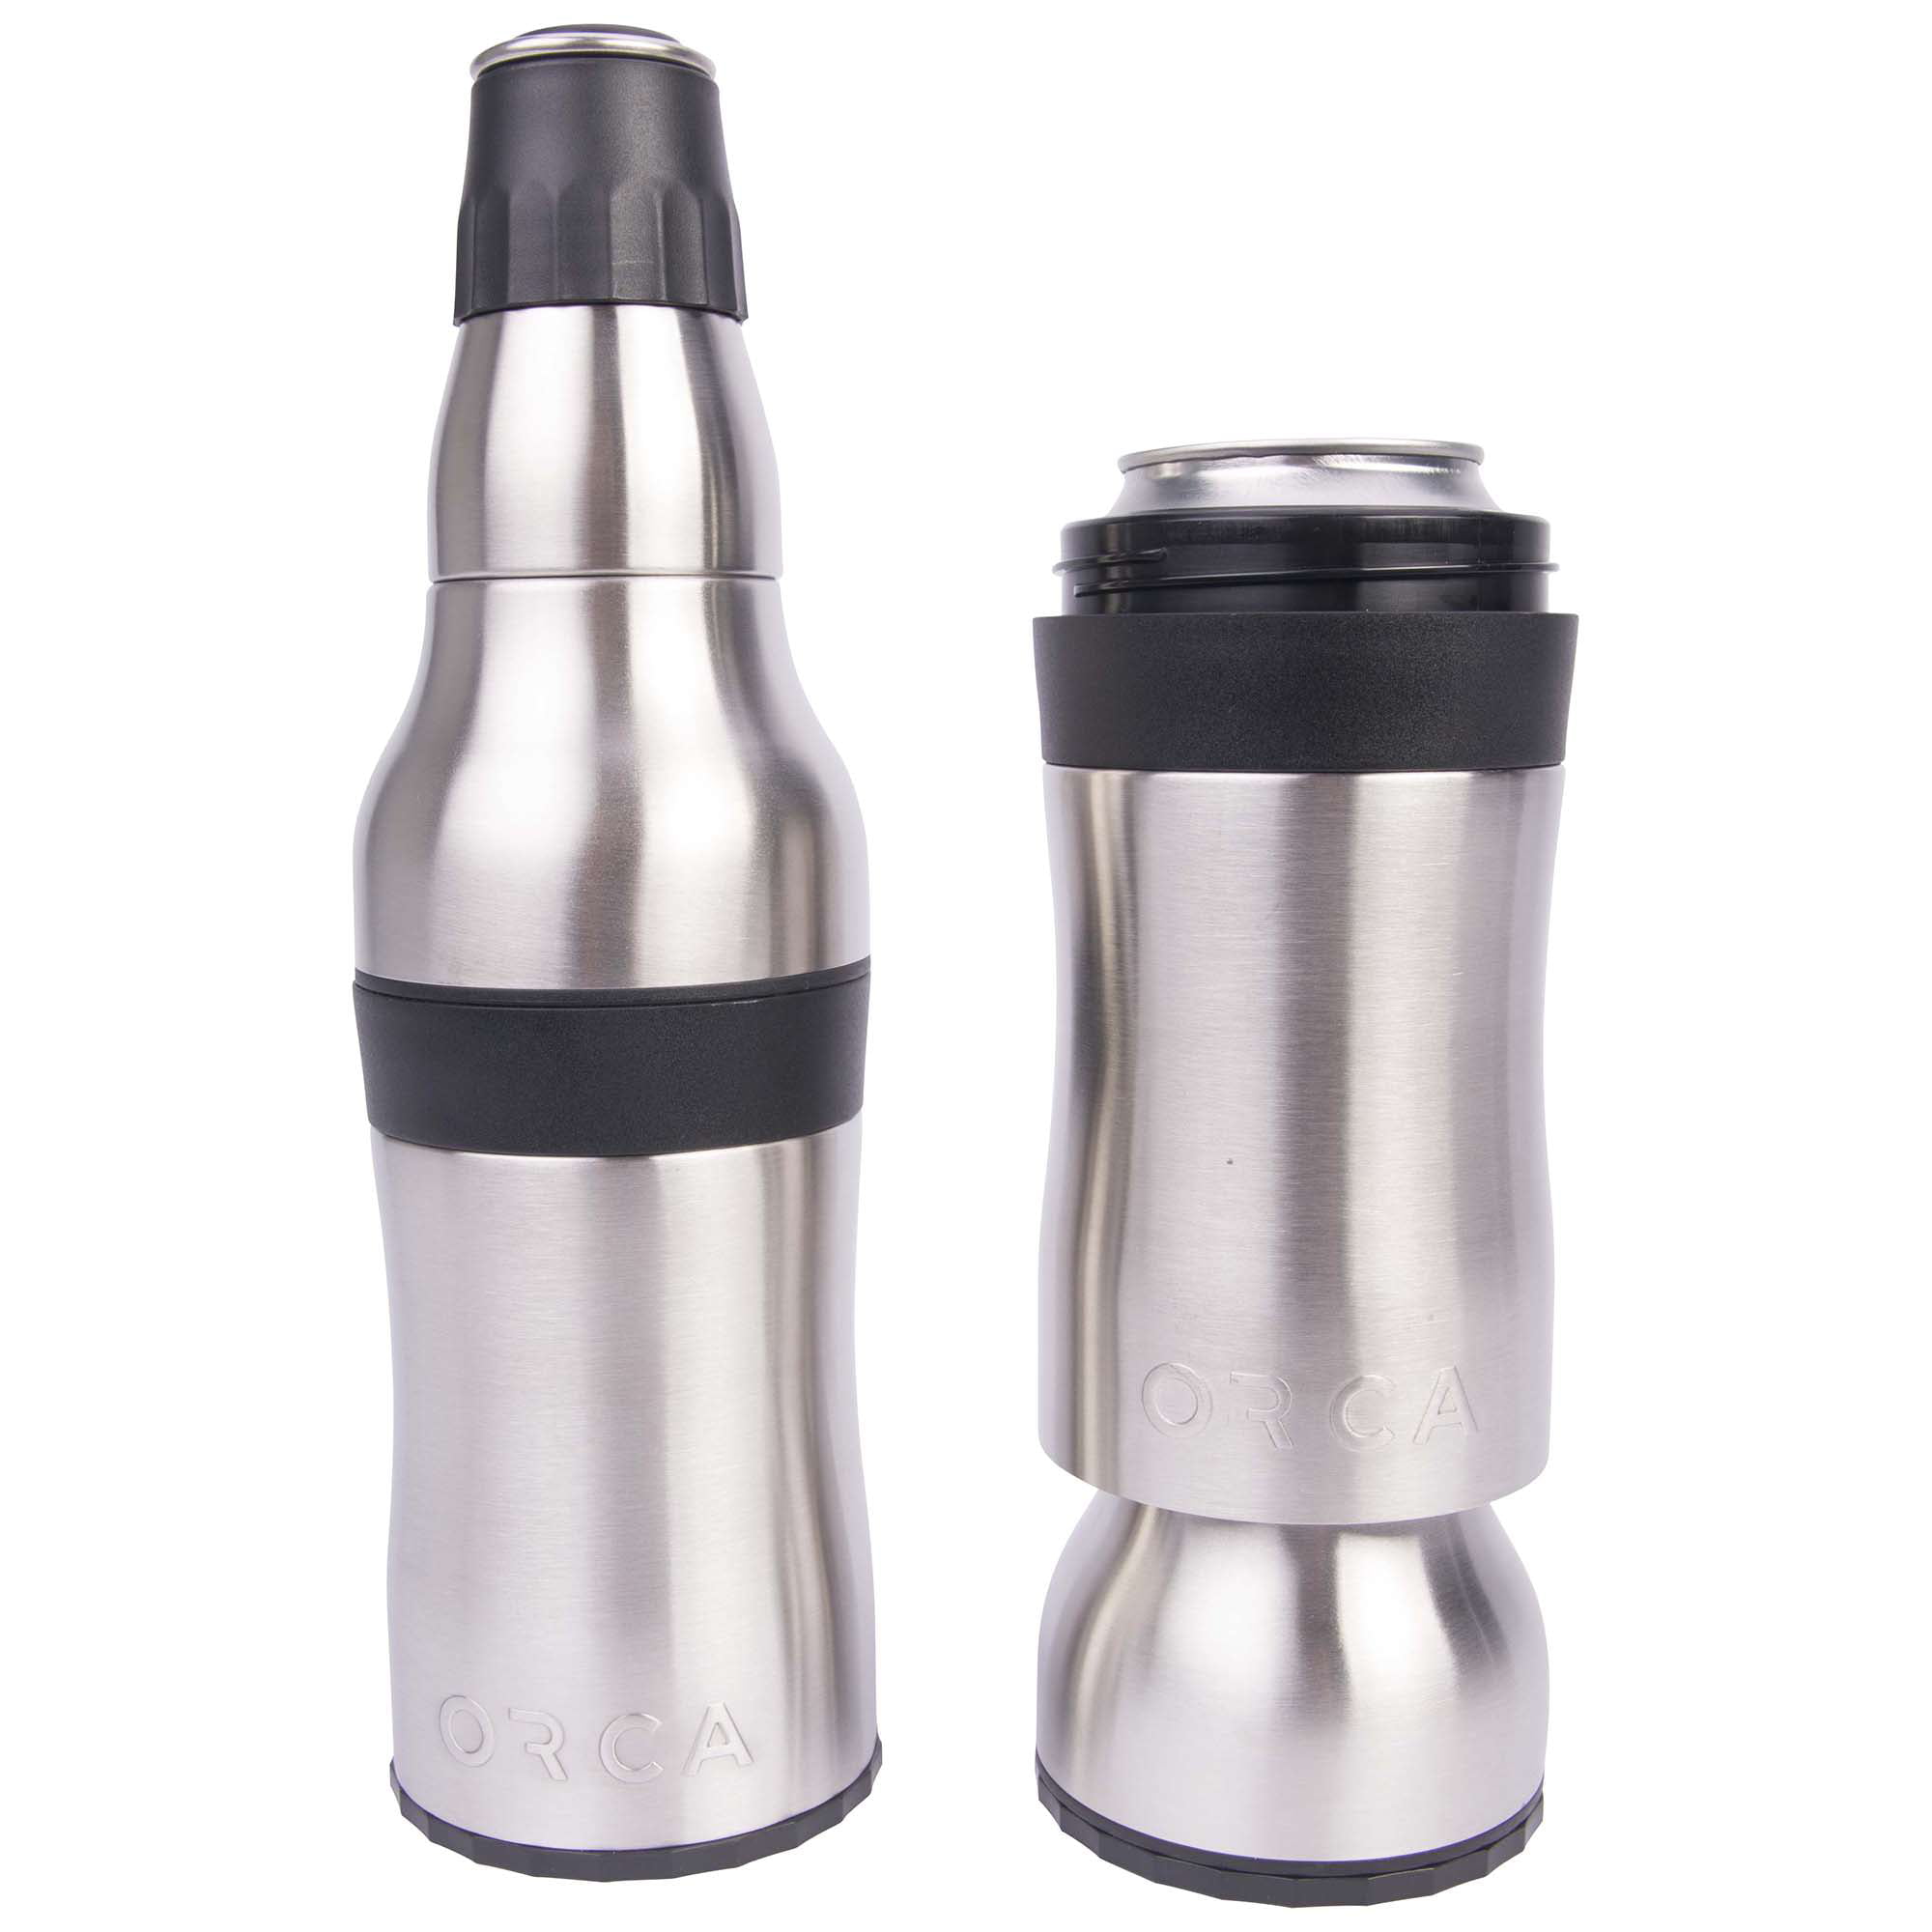 2 Orca Rocket Insulated Stainless Steel Bottle/Can Koozies NEW - Lot Of 2